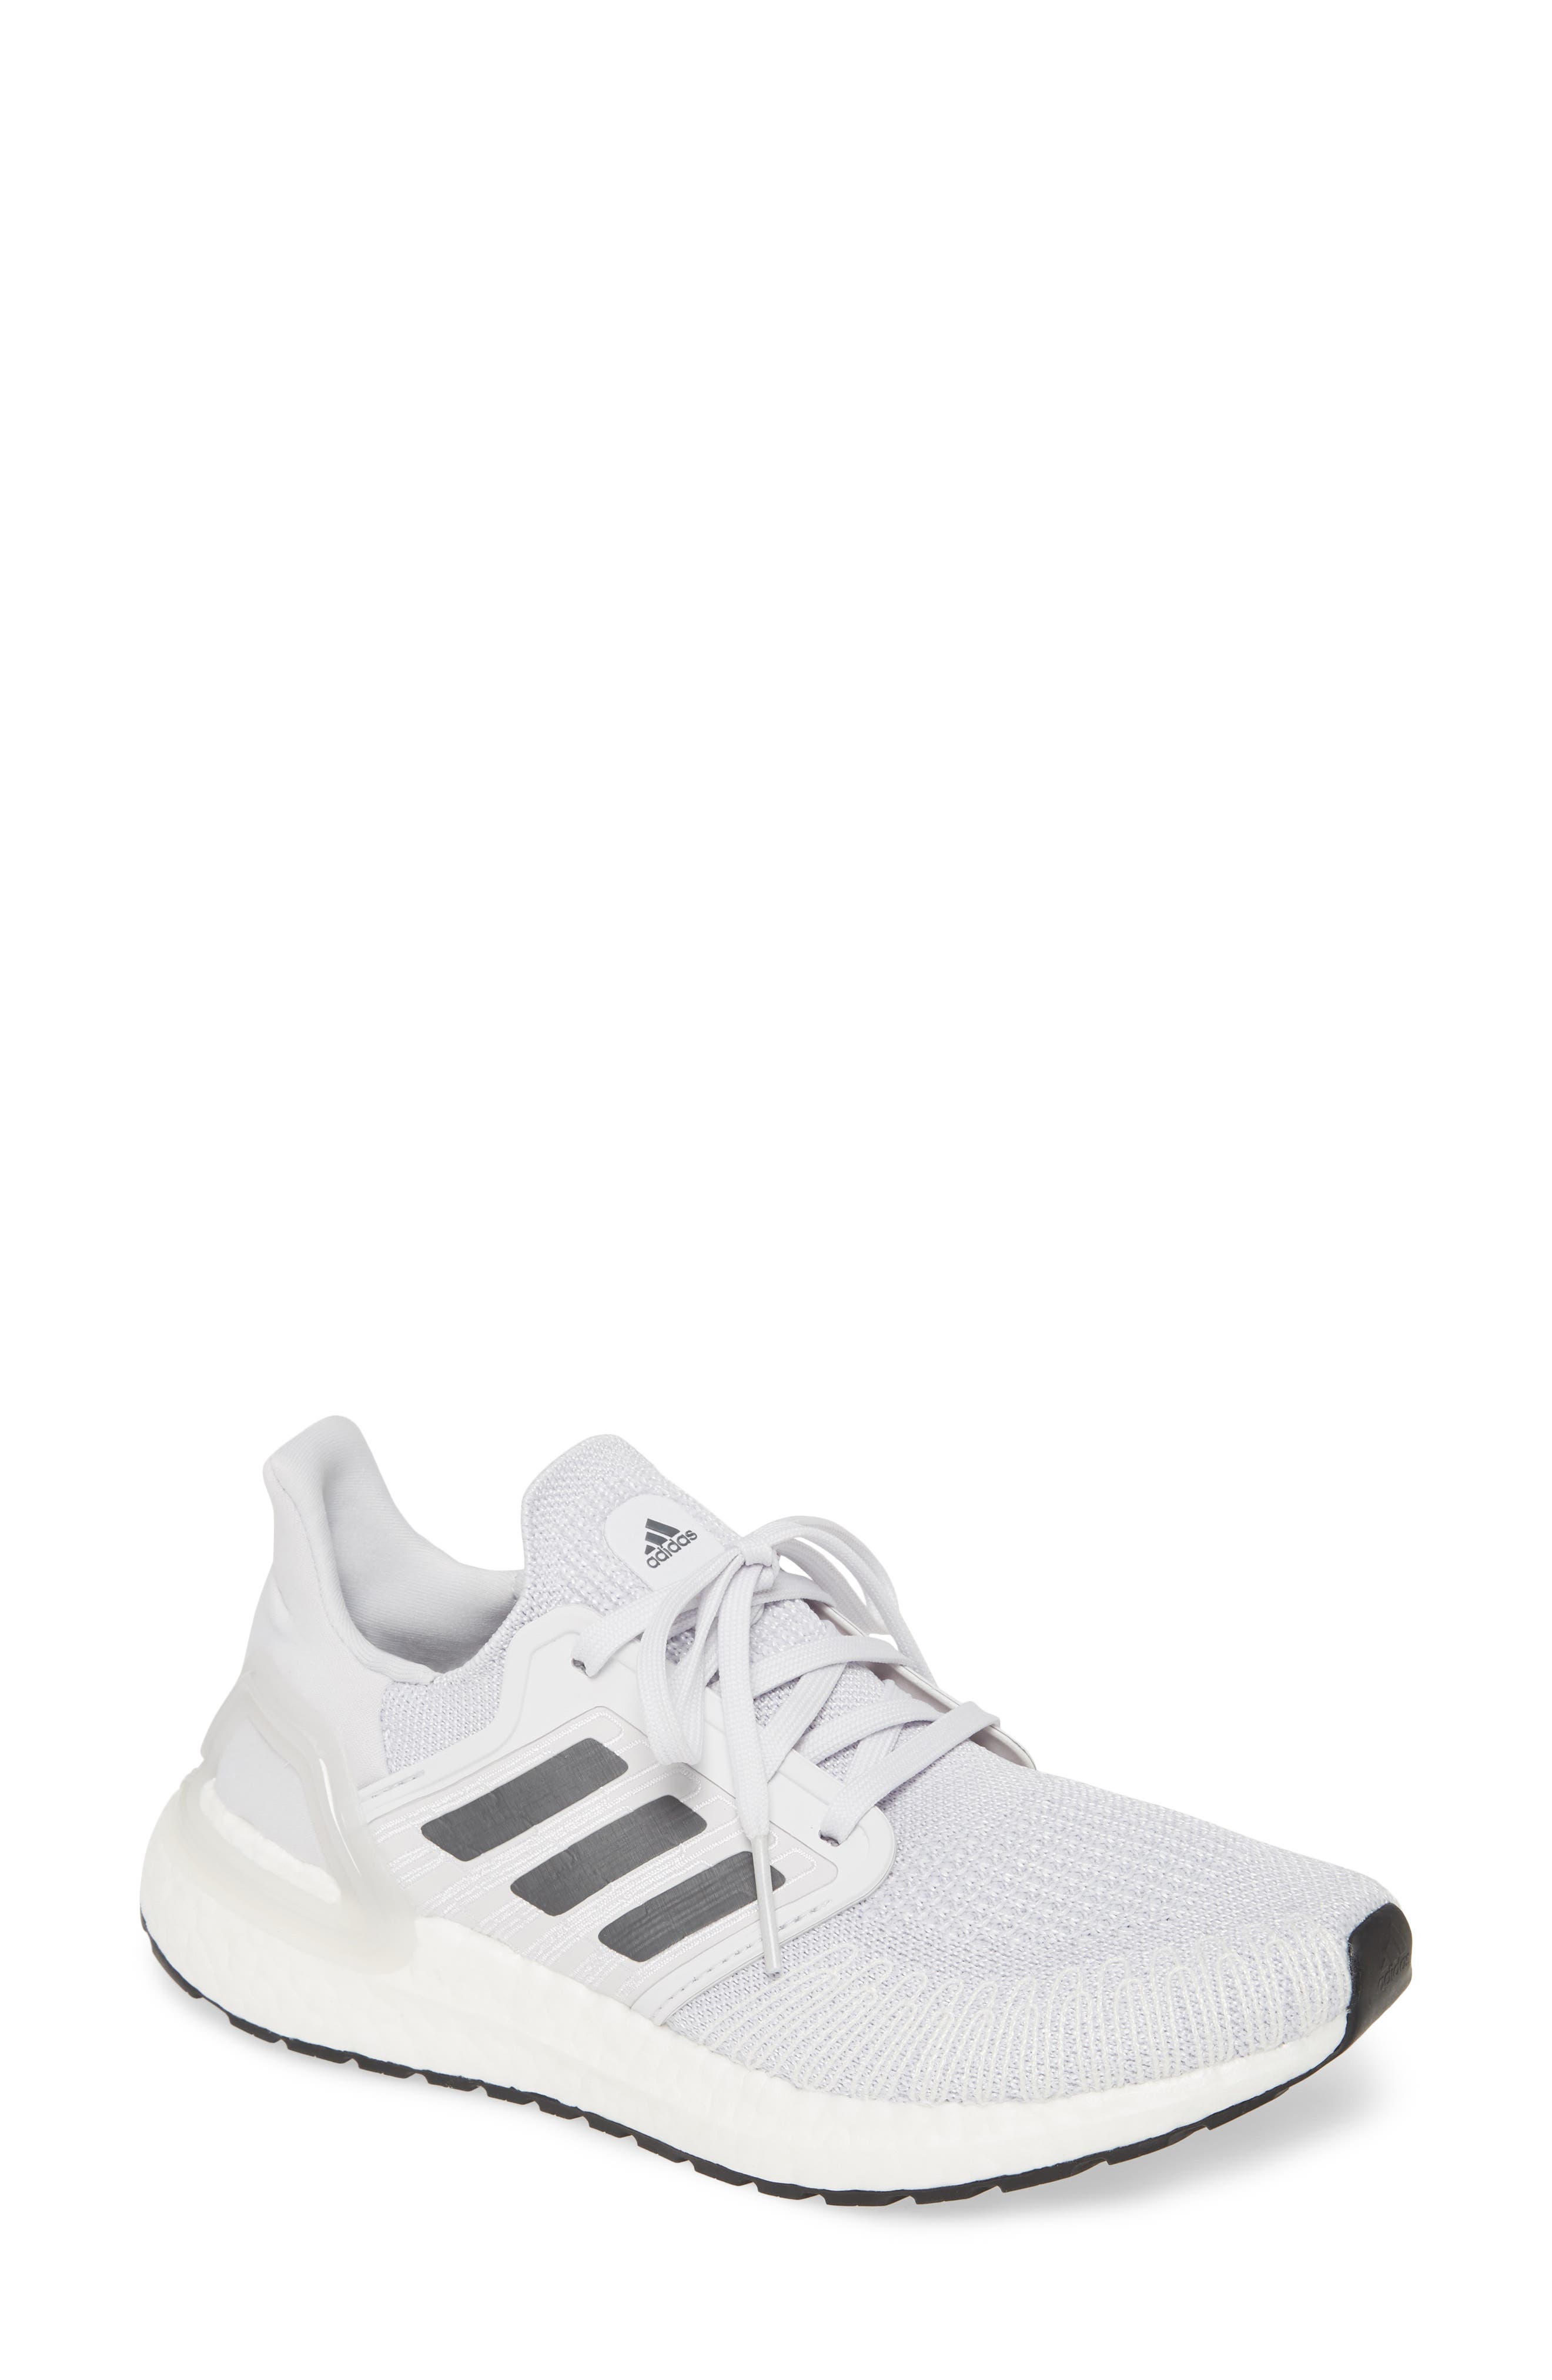 adidas womens shoes nordstrom